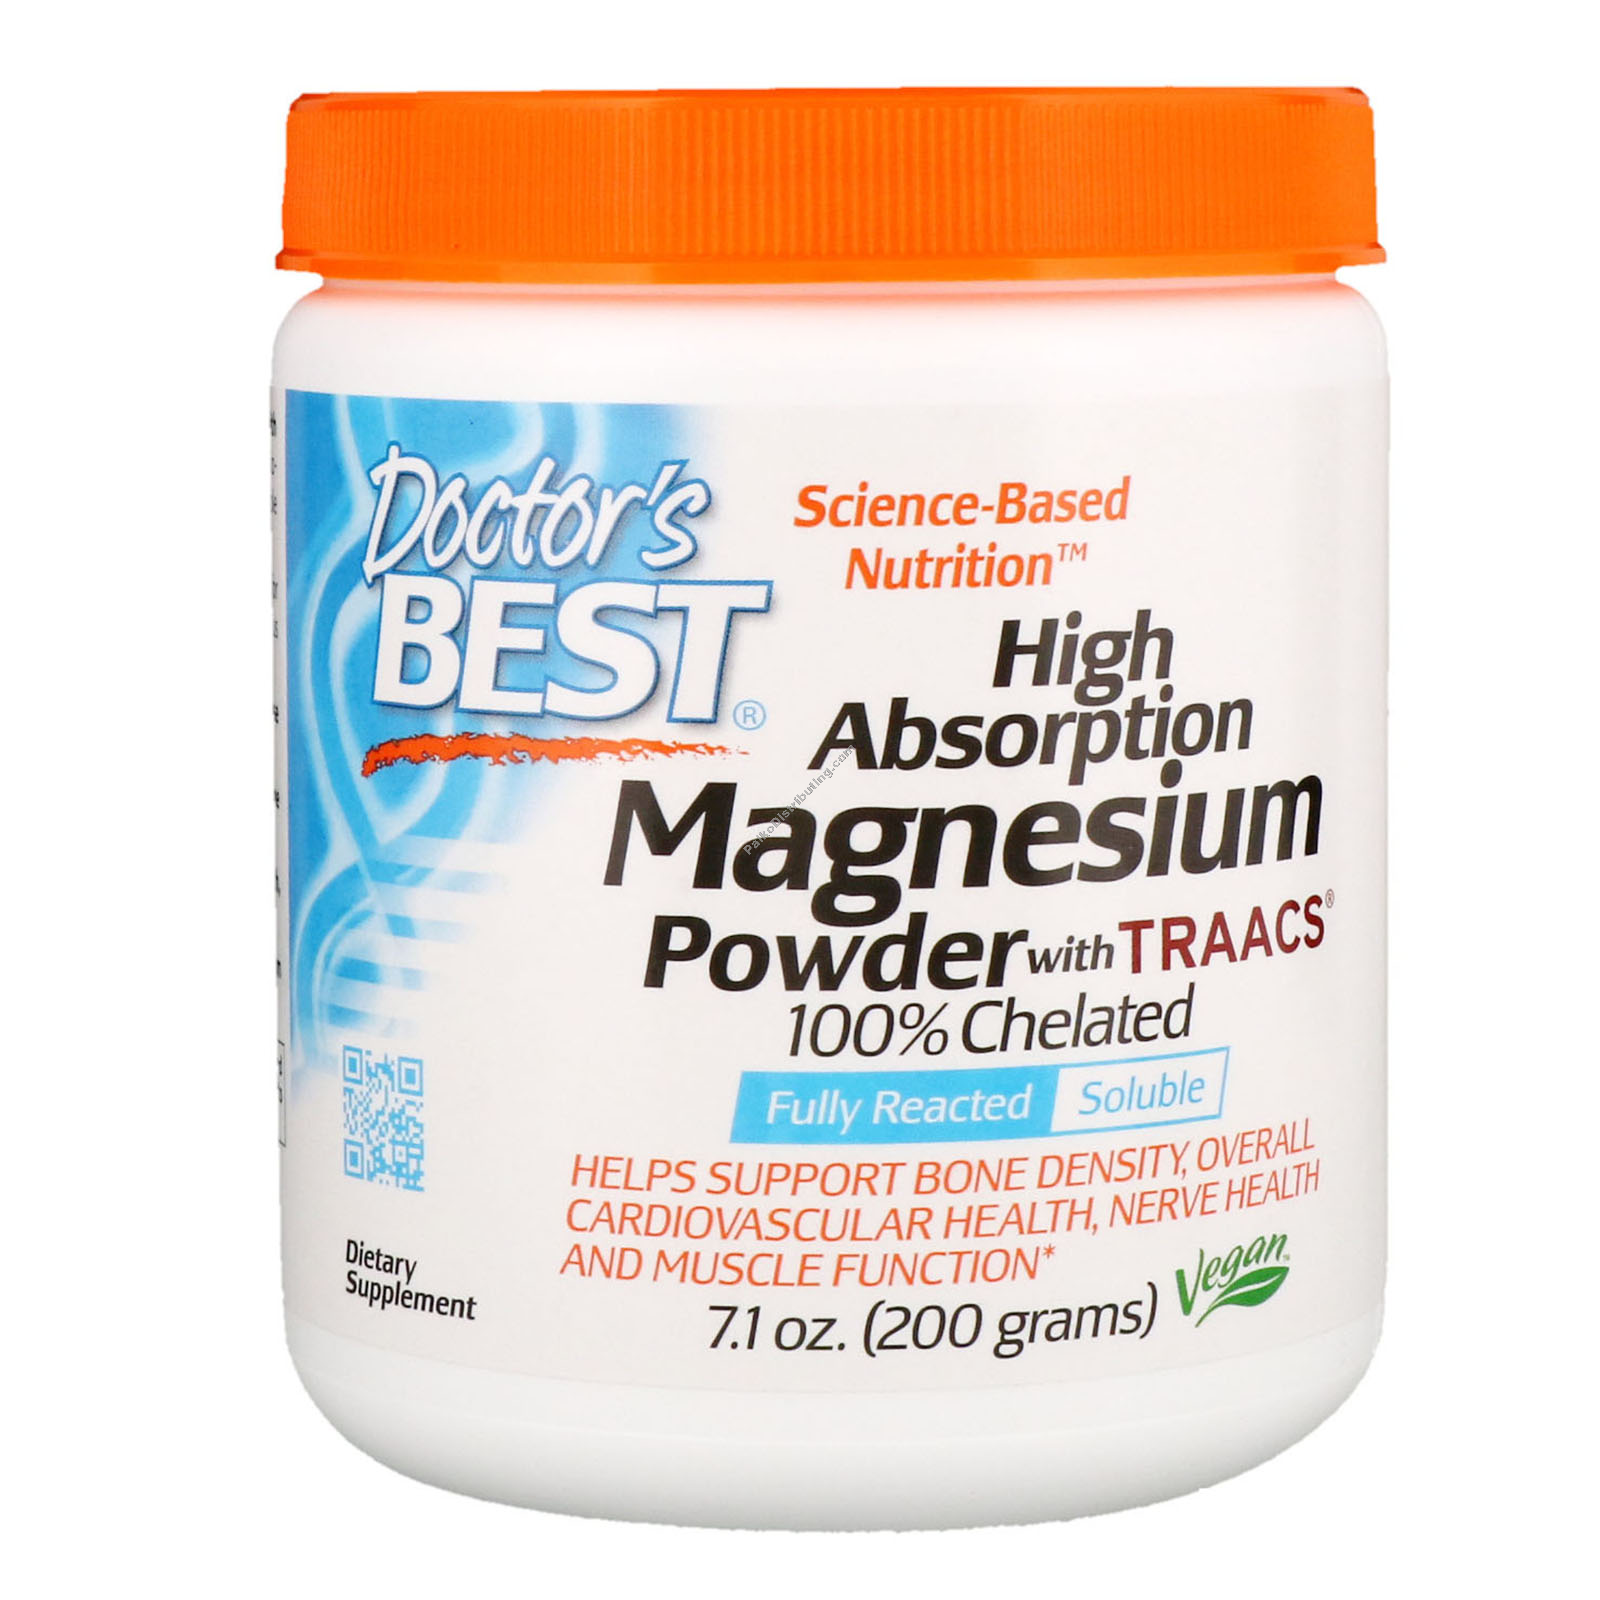 Product Image: High Absorption Magnesium Powder